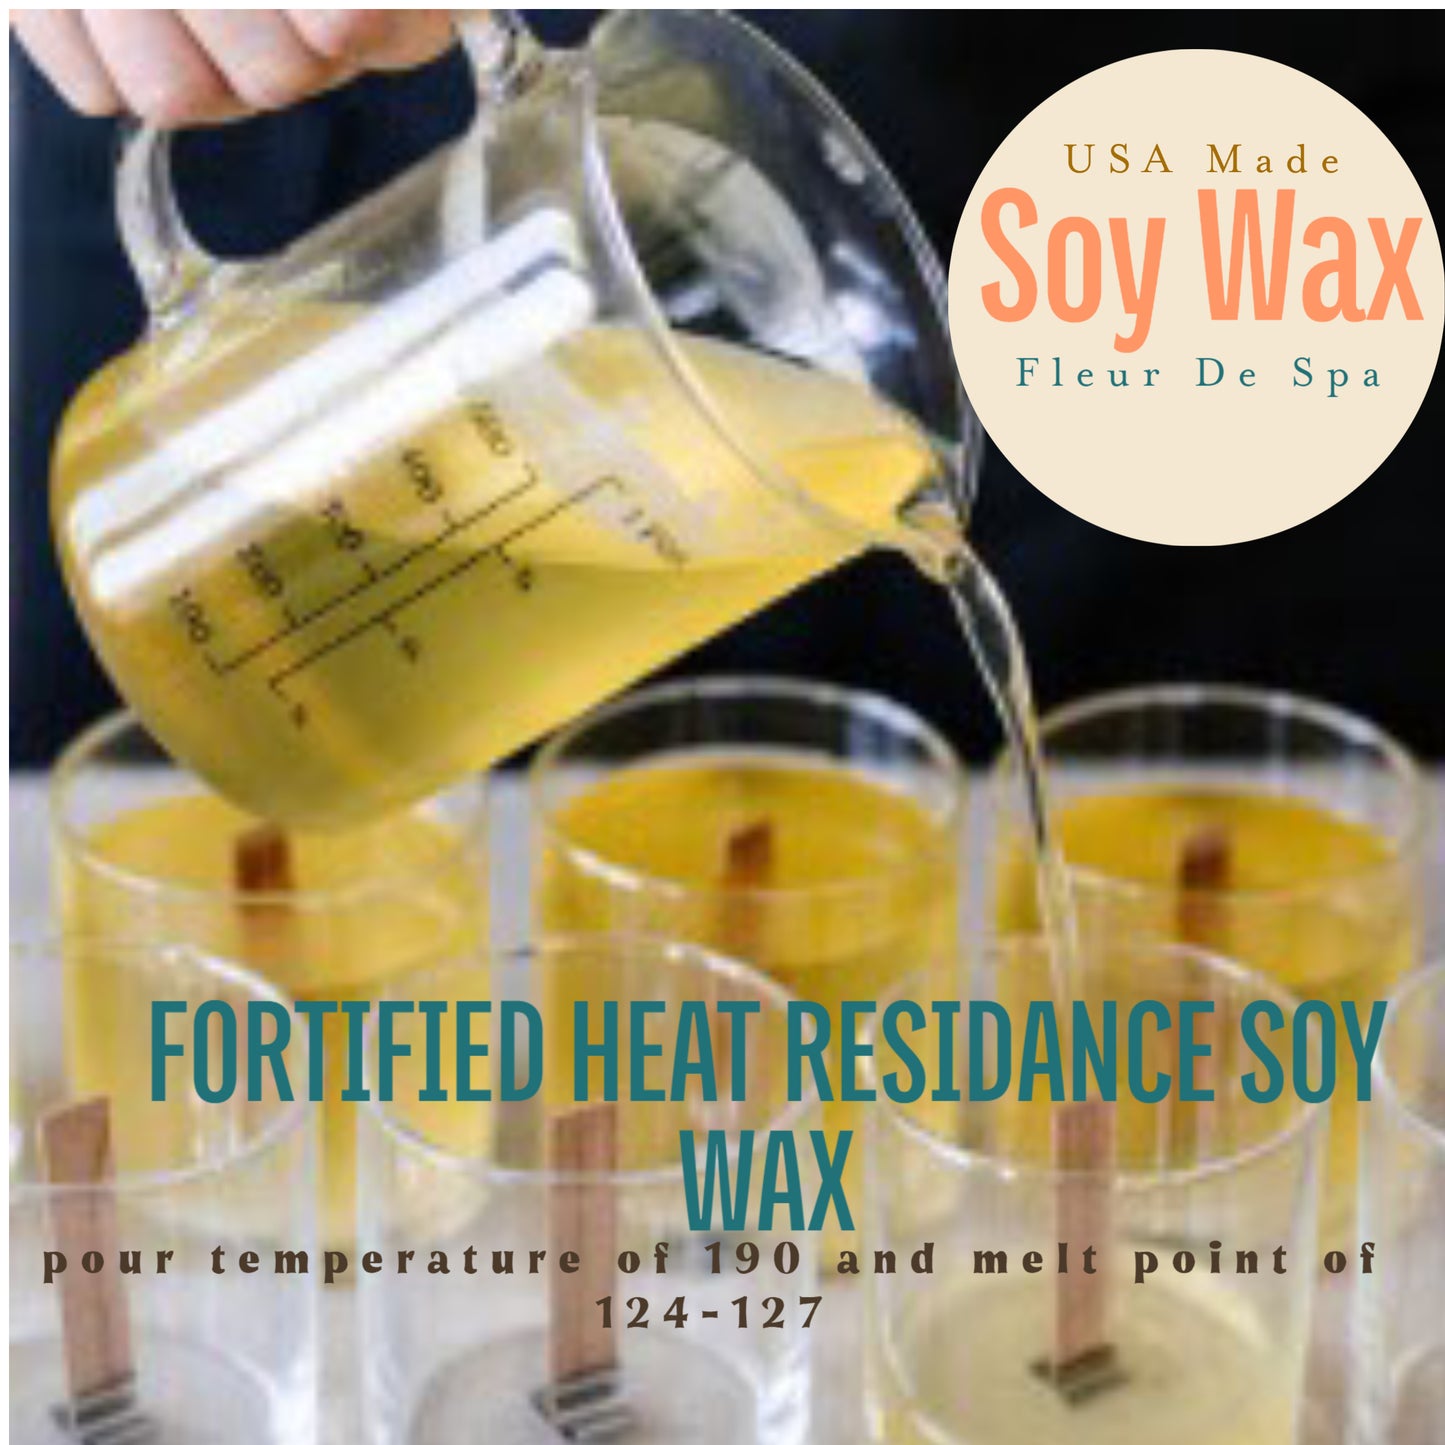 Fleur De Spa Soy Wax for Candle Making - Packaged in 1lb Bars - Natural Soy Wax Made in USA